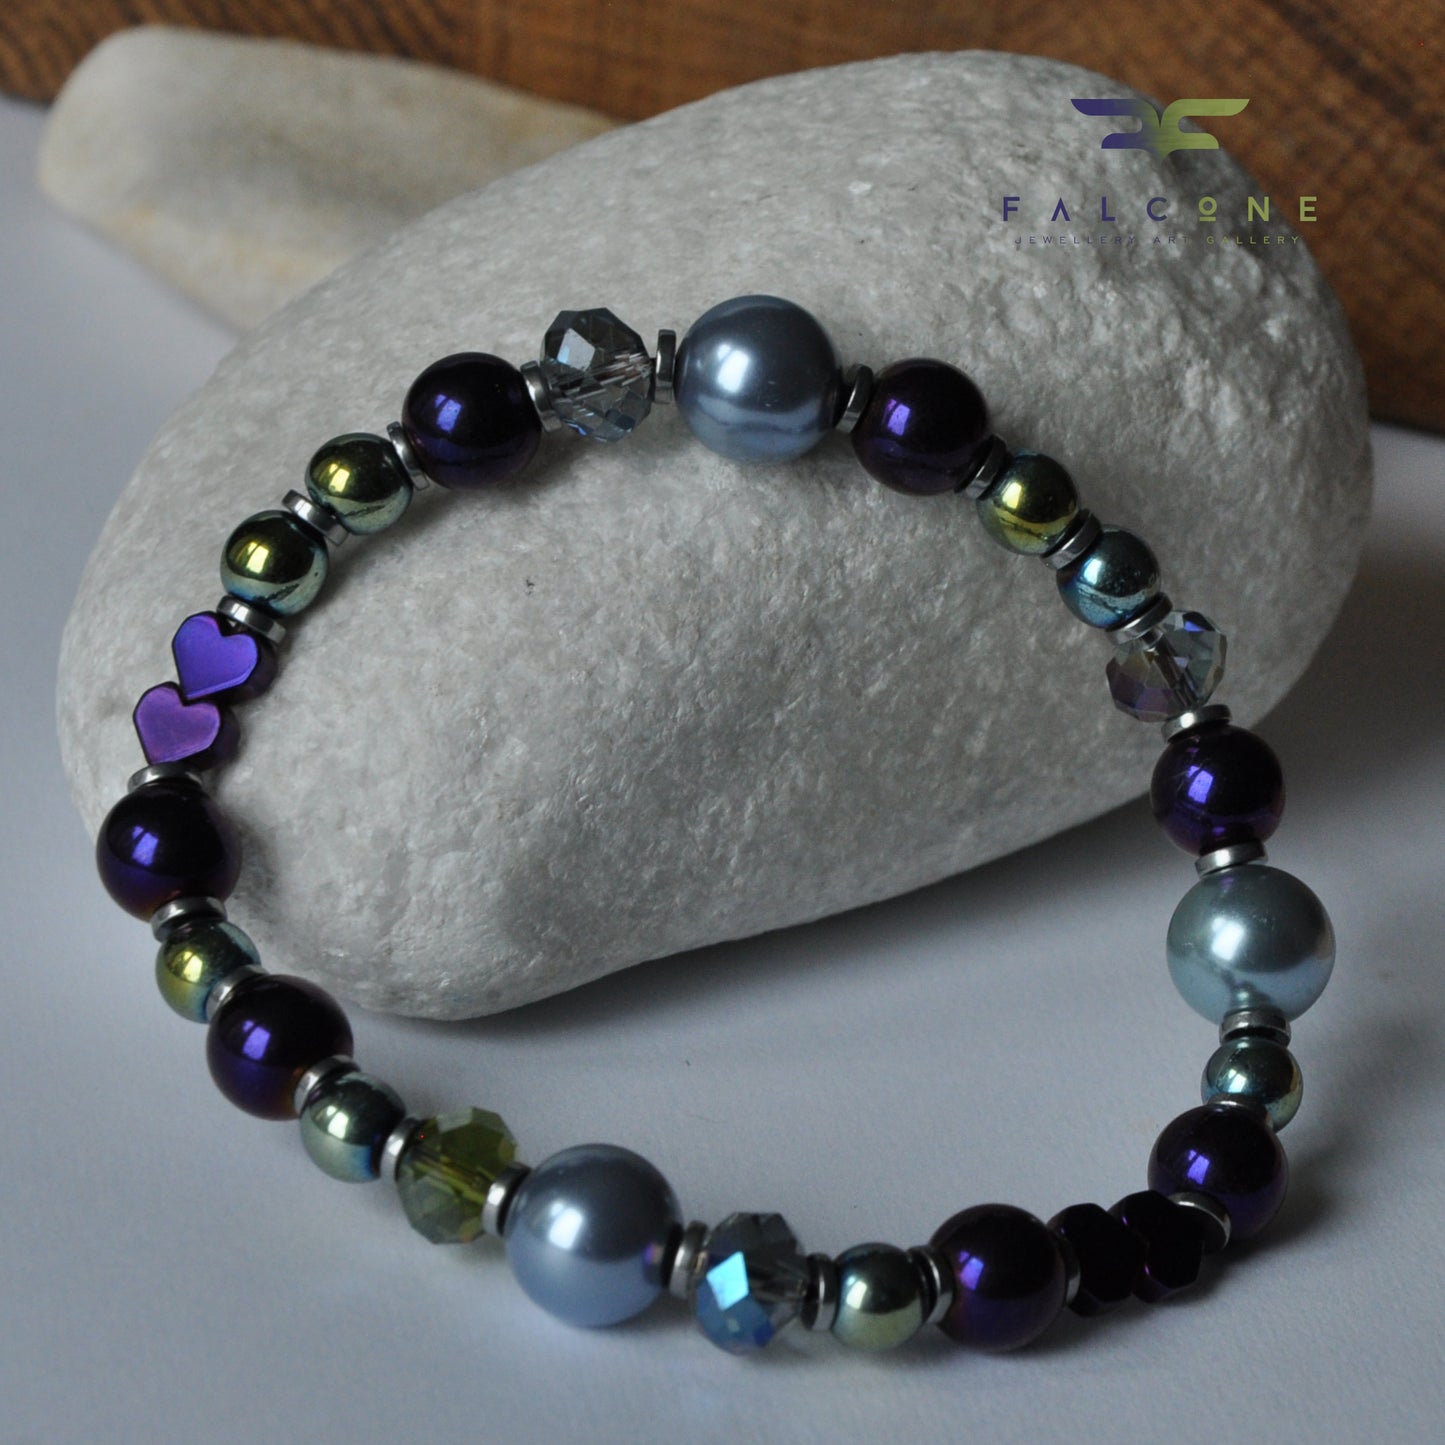 Bracelet with hematite, glass pearls and crystal rondelles 'Eggplant Hearts'